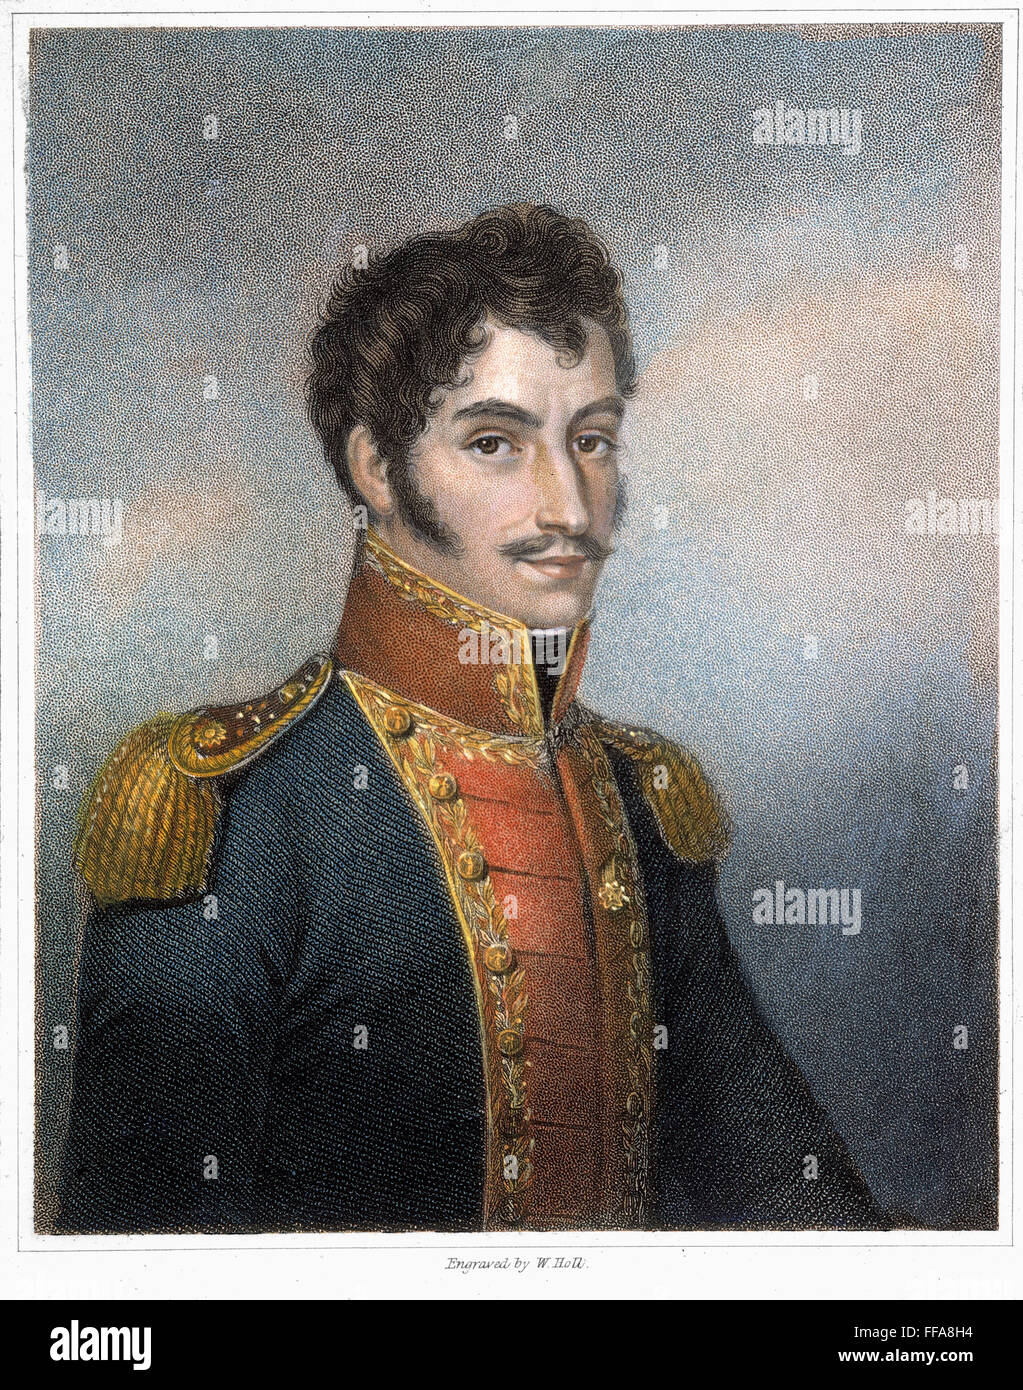 SIMON BOLIVAR (1783-1830). /nSouth American statesman, soldier, and revolutionary leader. Contemporary English stipple engraving. Stock Photo